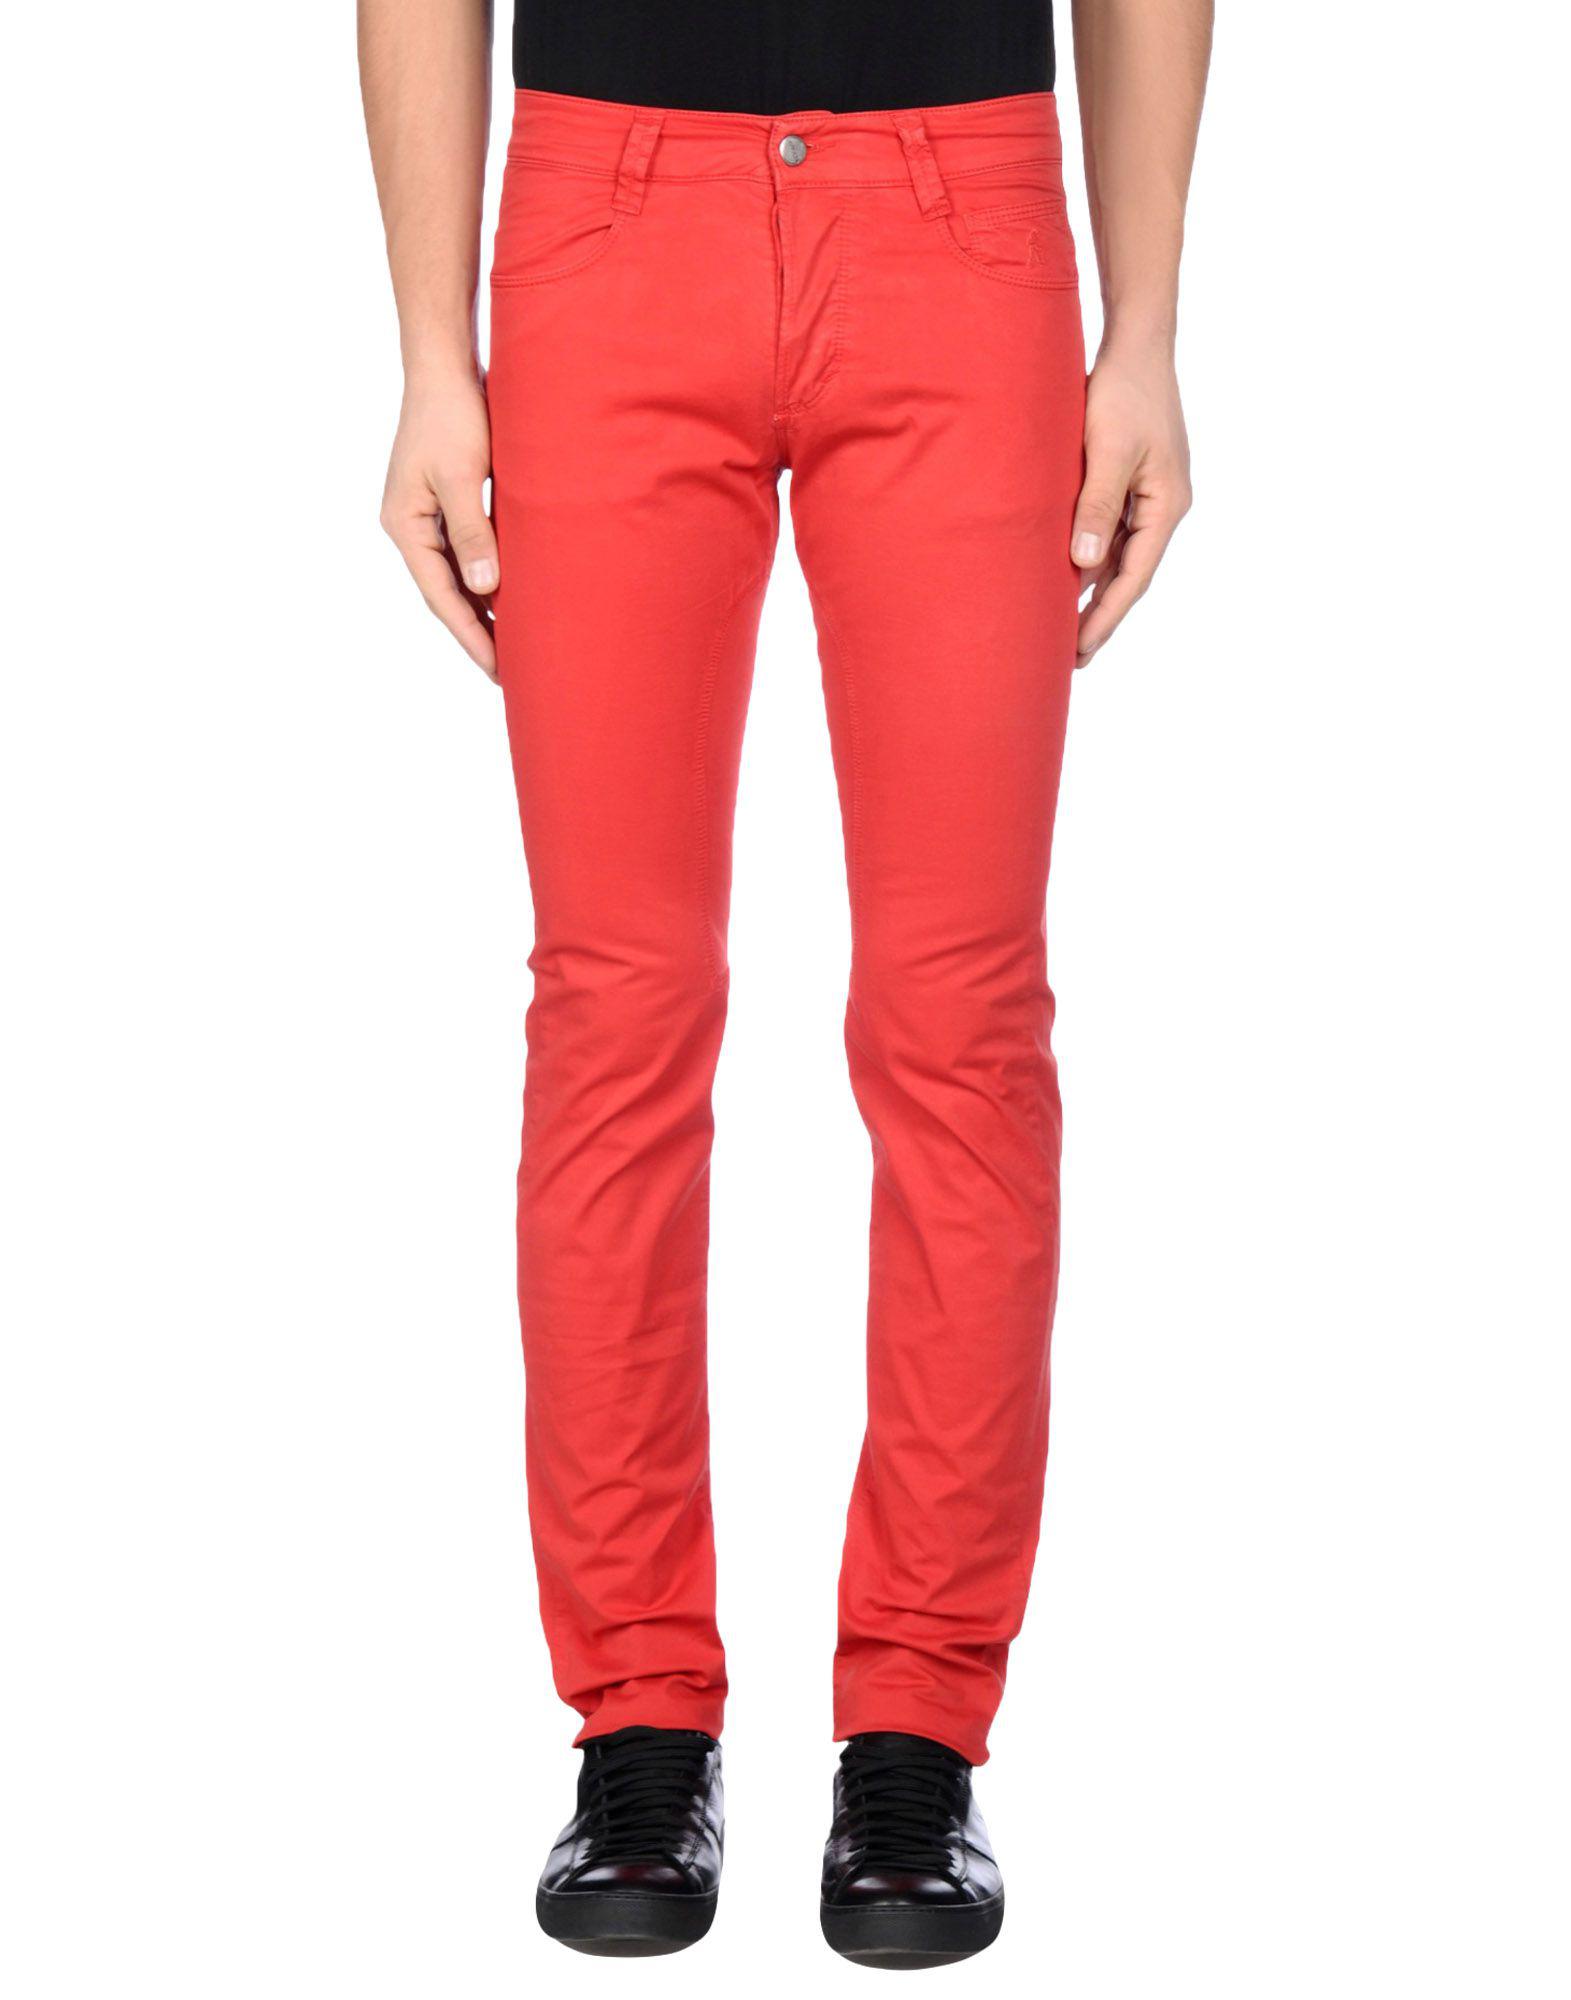 Siviglia Cotton Casual Pants in Red for Men - Lyst